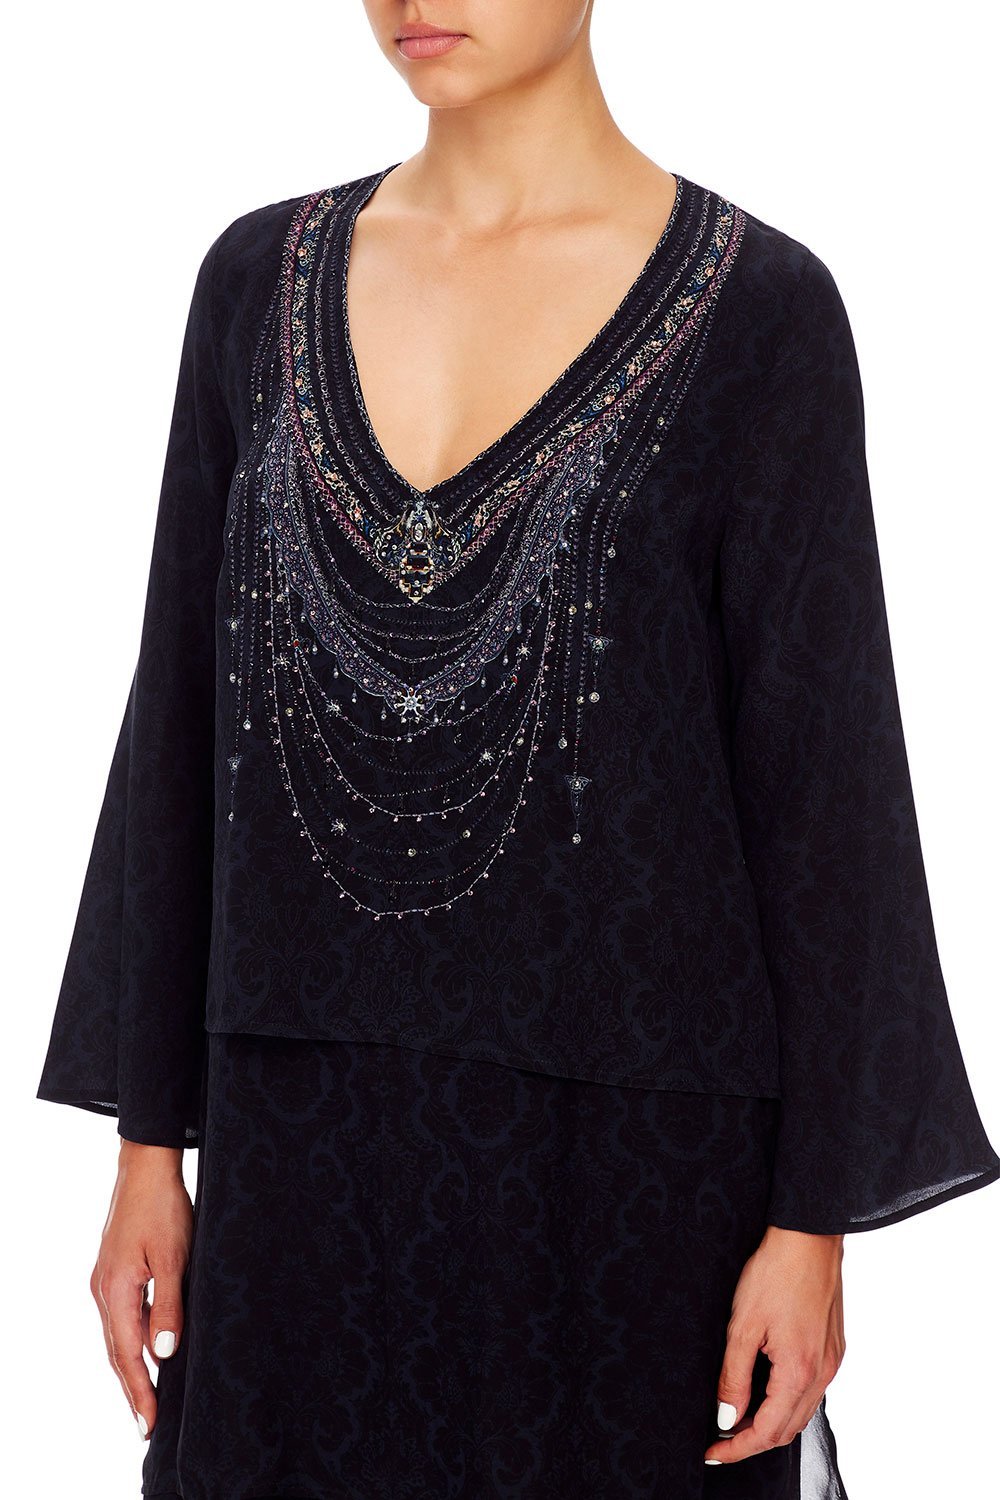 BLOUSE WITH SIDE SPLIT MIDNIGHT MEETING